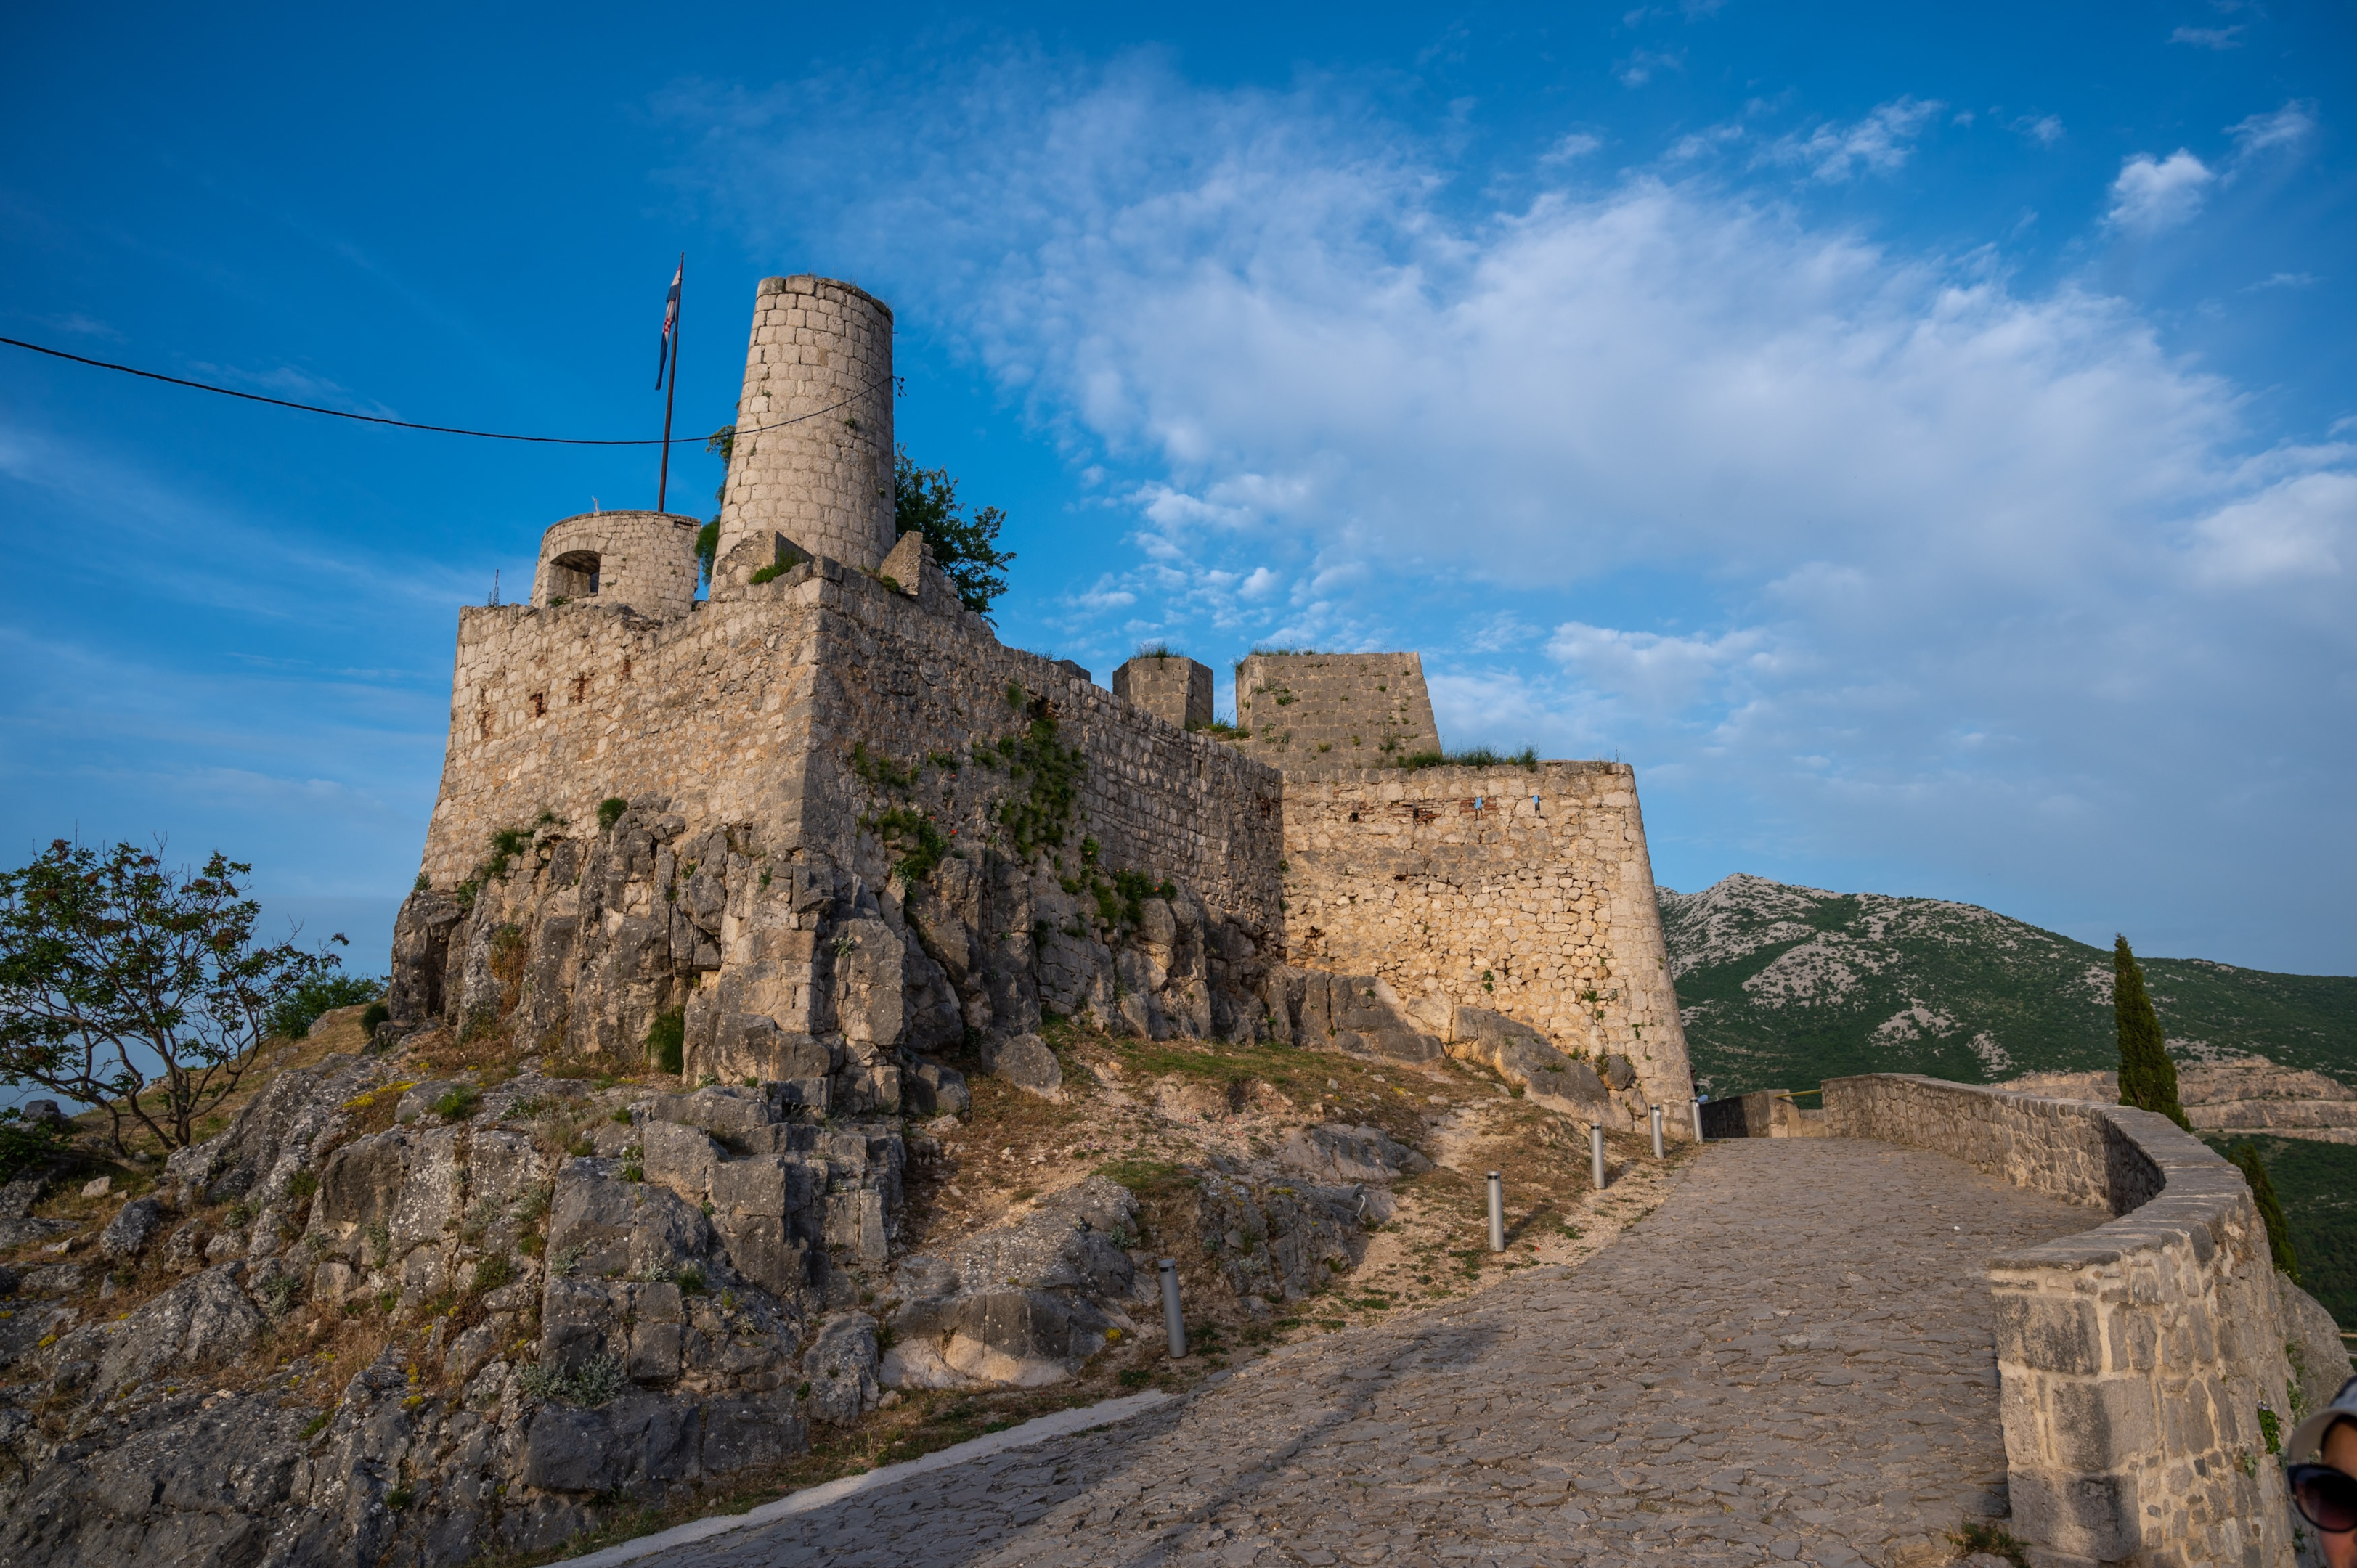 Game of Thrones Filming Location: Klis Fortress